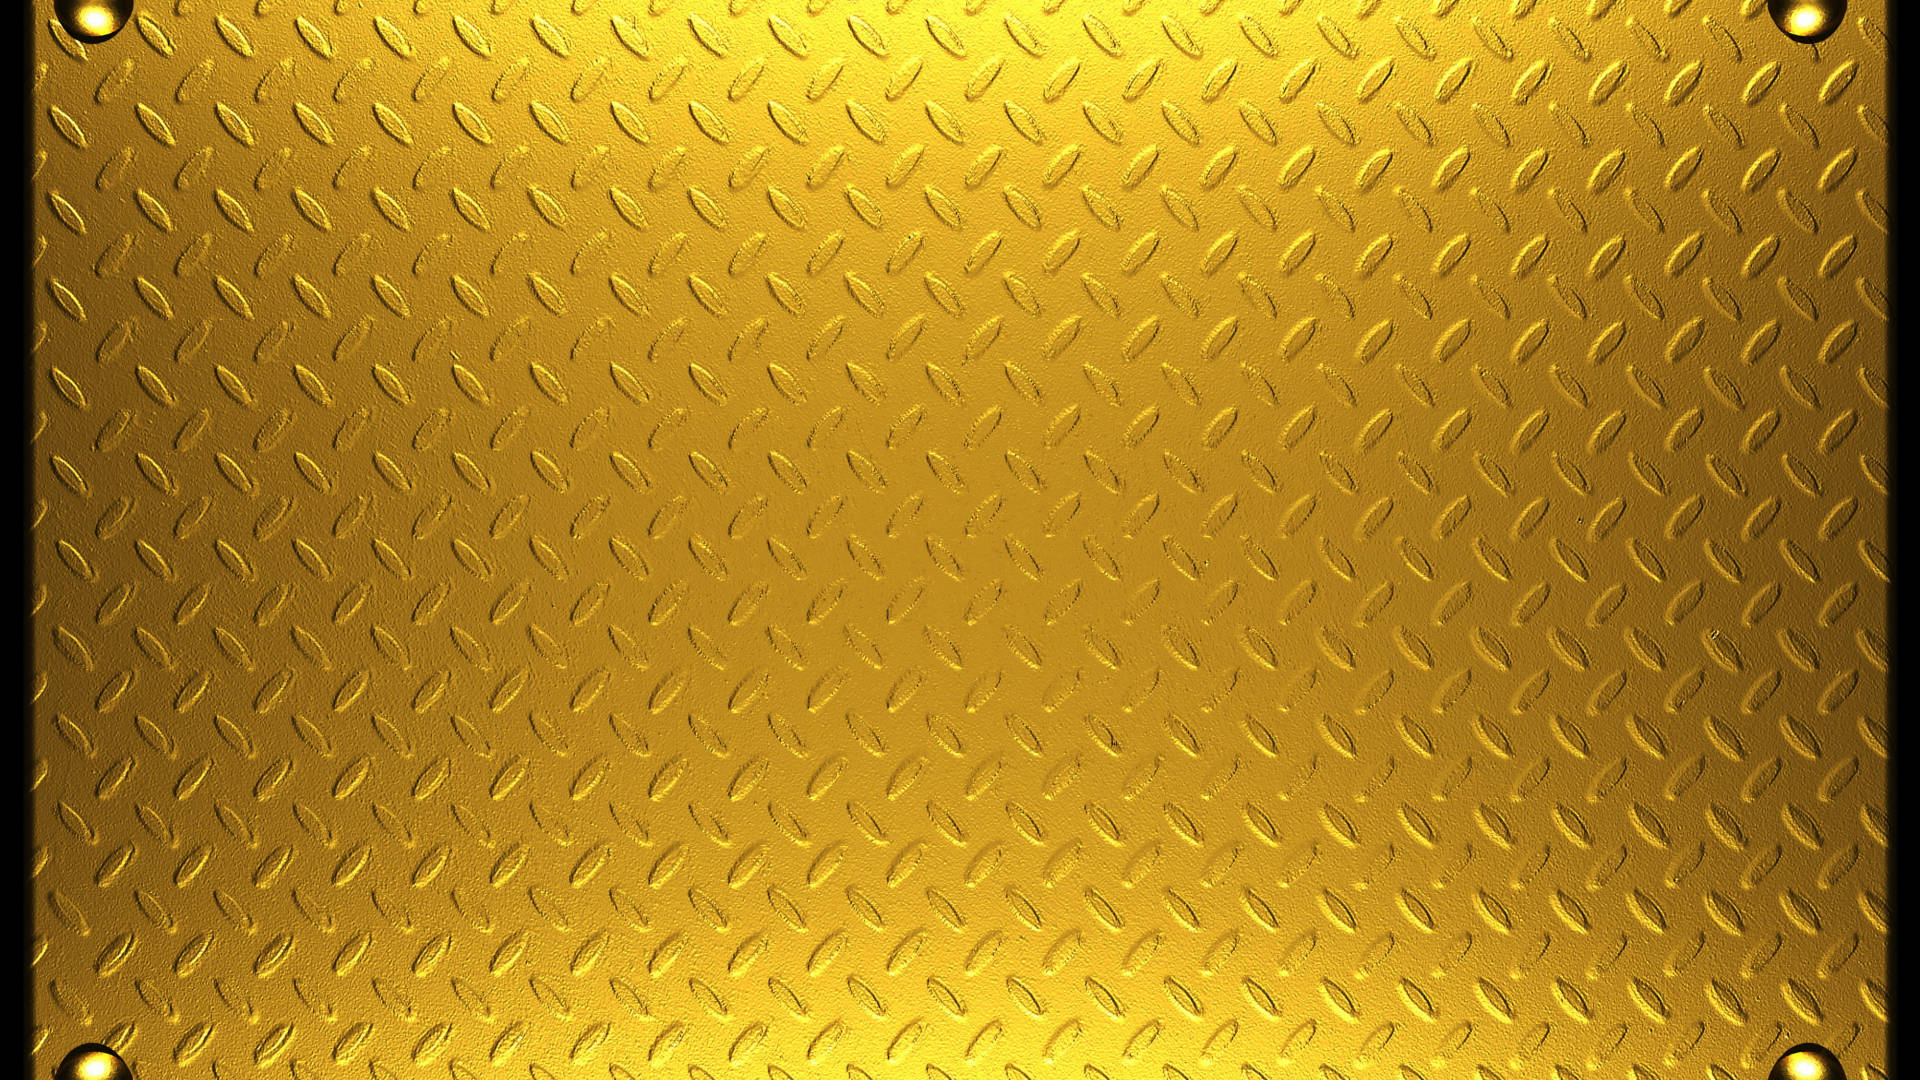 Gold Foil Metallic Surface Background